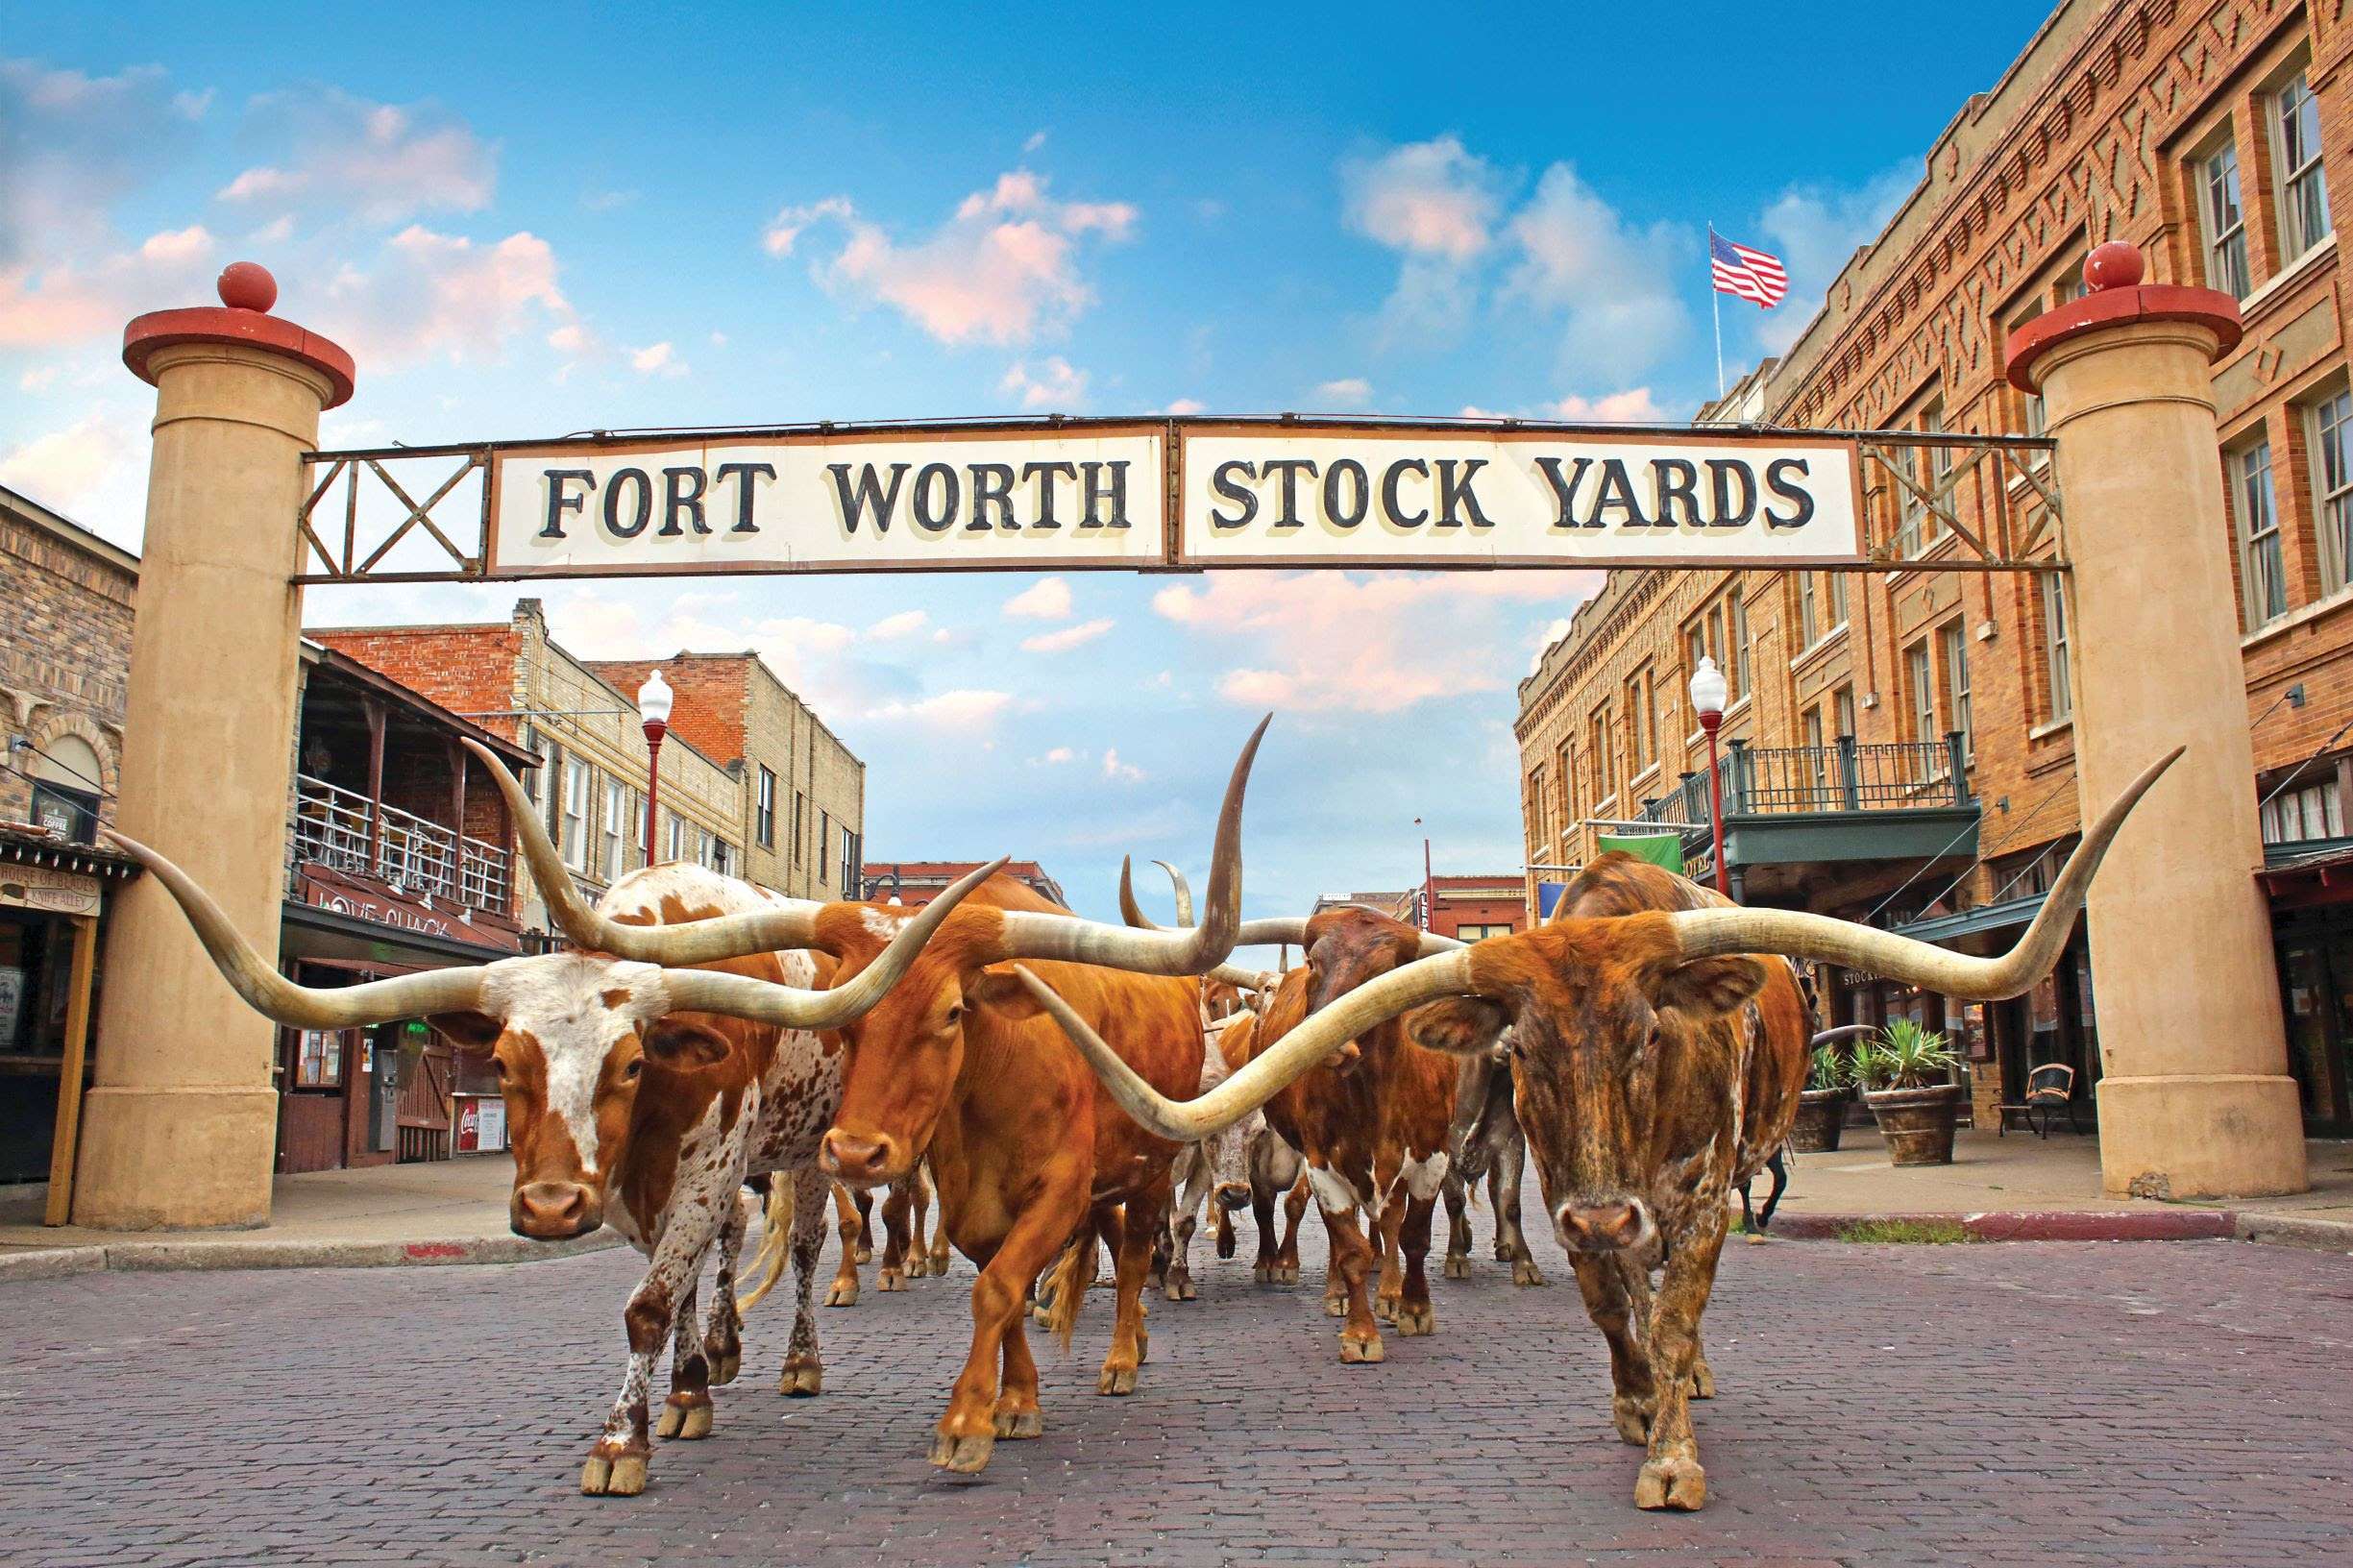 Thursday evening, fans can take in a little Texas at the Classic Kick-Off Party in the Fort Worth Stockyards. Head to Mule Alley to see the legendary Cattle Drive and listen to country music star Jimmie Allen along with other B.A.S.S. presentations.